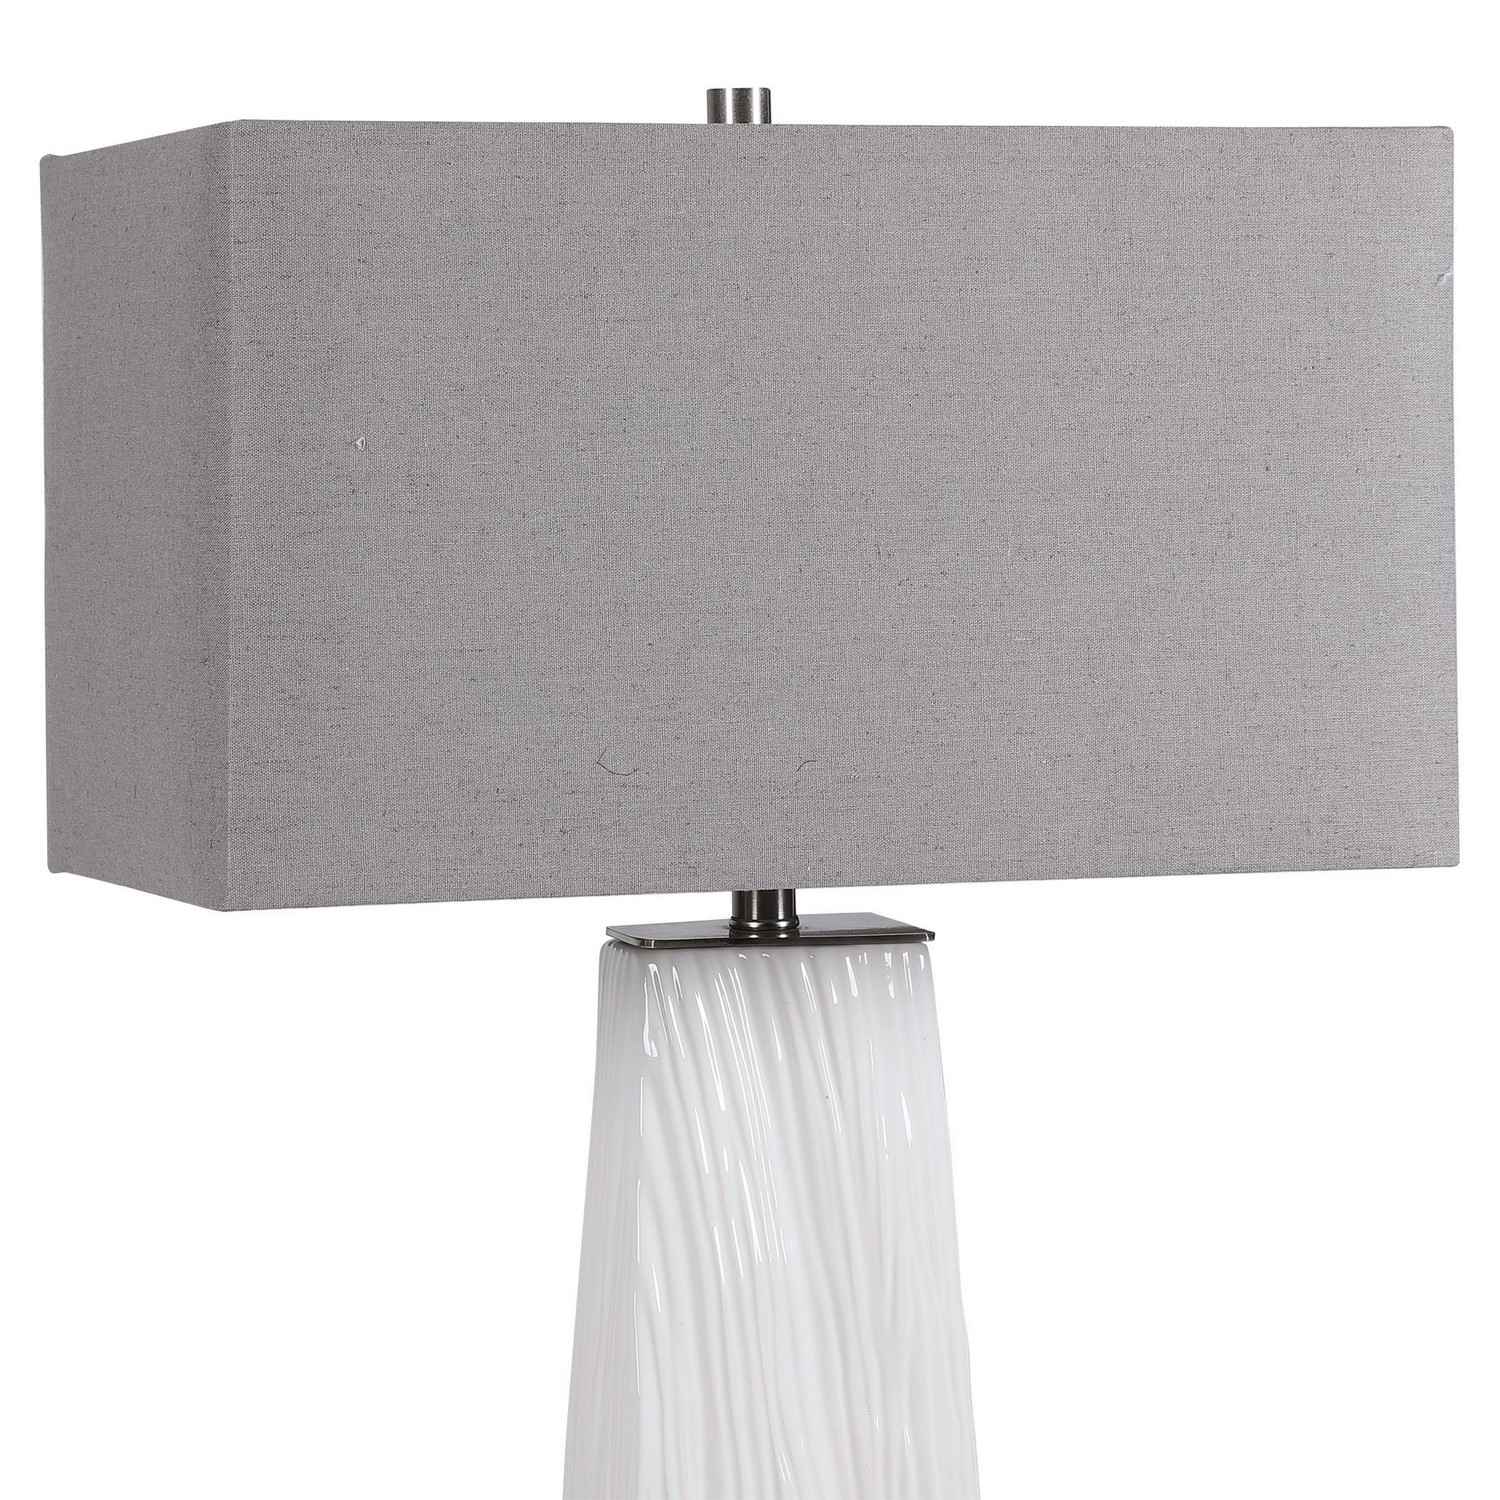 Uttermost Sycamore Table Lamp - White